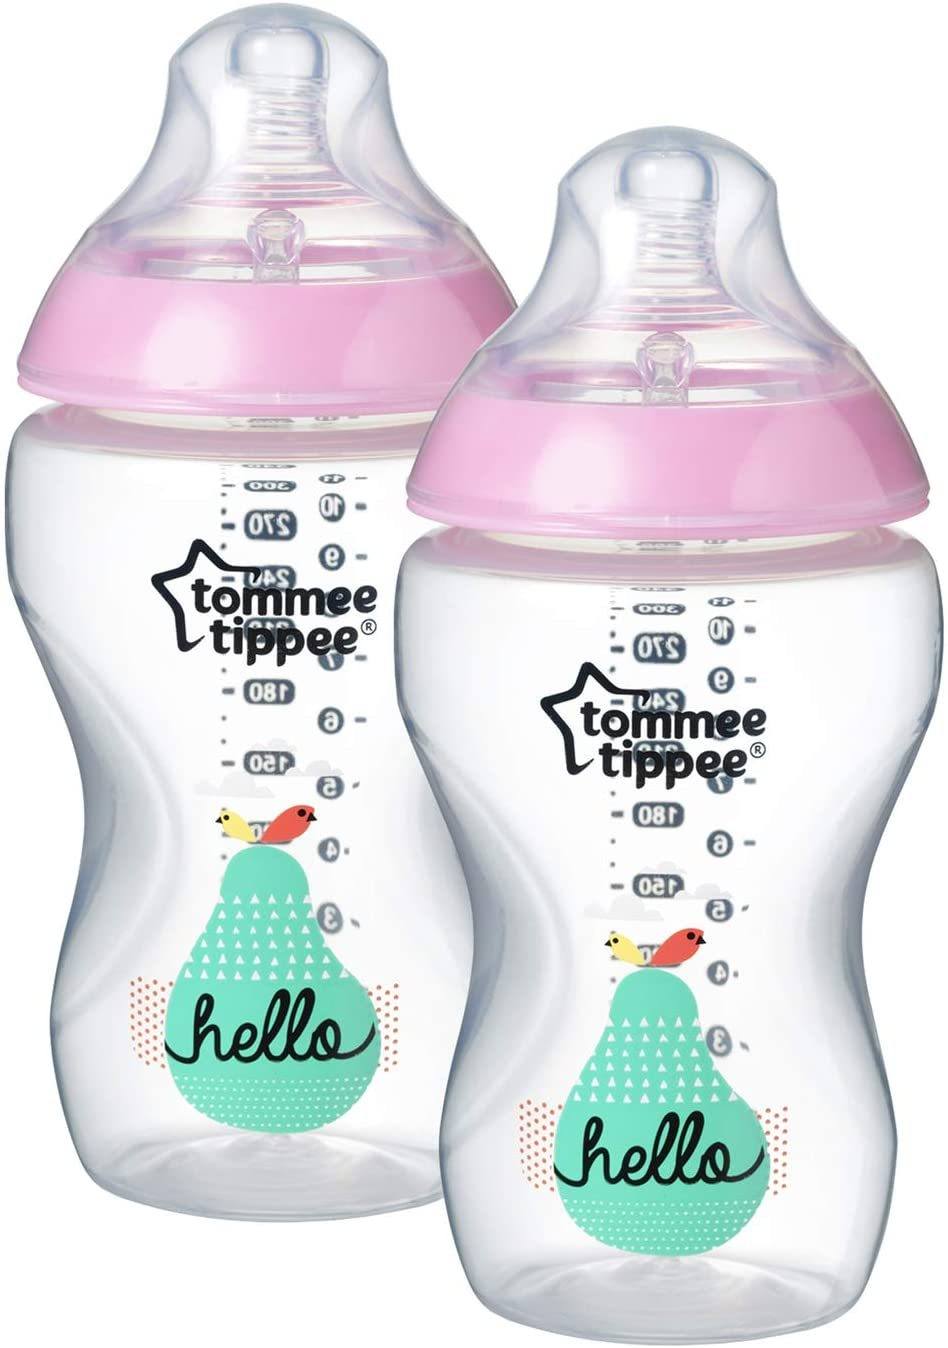 Tommee Tippee - kit de 2 mamadeiras decoradas 340 ml Anne Claire Baby Store Rosa 